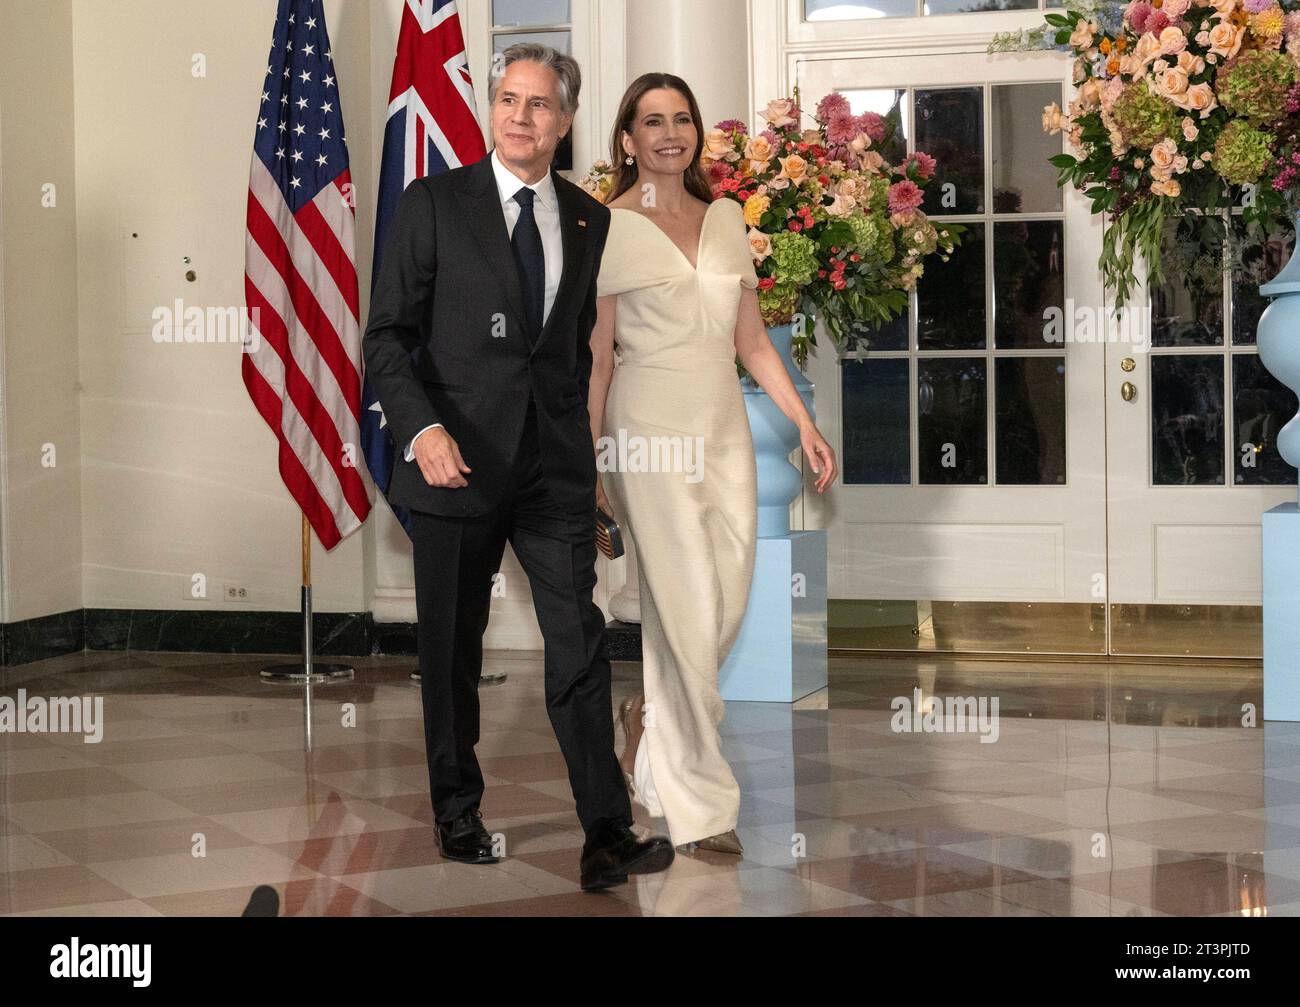 United States Secretary of State Antony Blinken and Evan Ryan arrive for the State Dinner honoring Prime Minister Anthony Albanese of Australia and Jodie Haydon in the Booksellers area of the White House in Washington, DC on Wednesday, October 25, 2023. Copyright: xRonxSachsx/xCNPx/MediaPunchx Credit: Imago/Alamy Live News Stock Photo